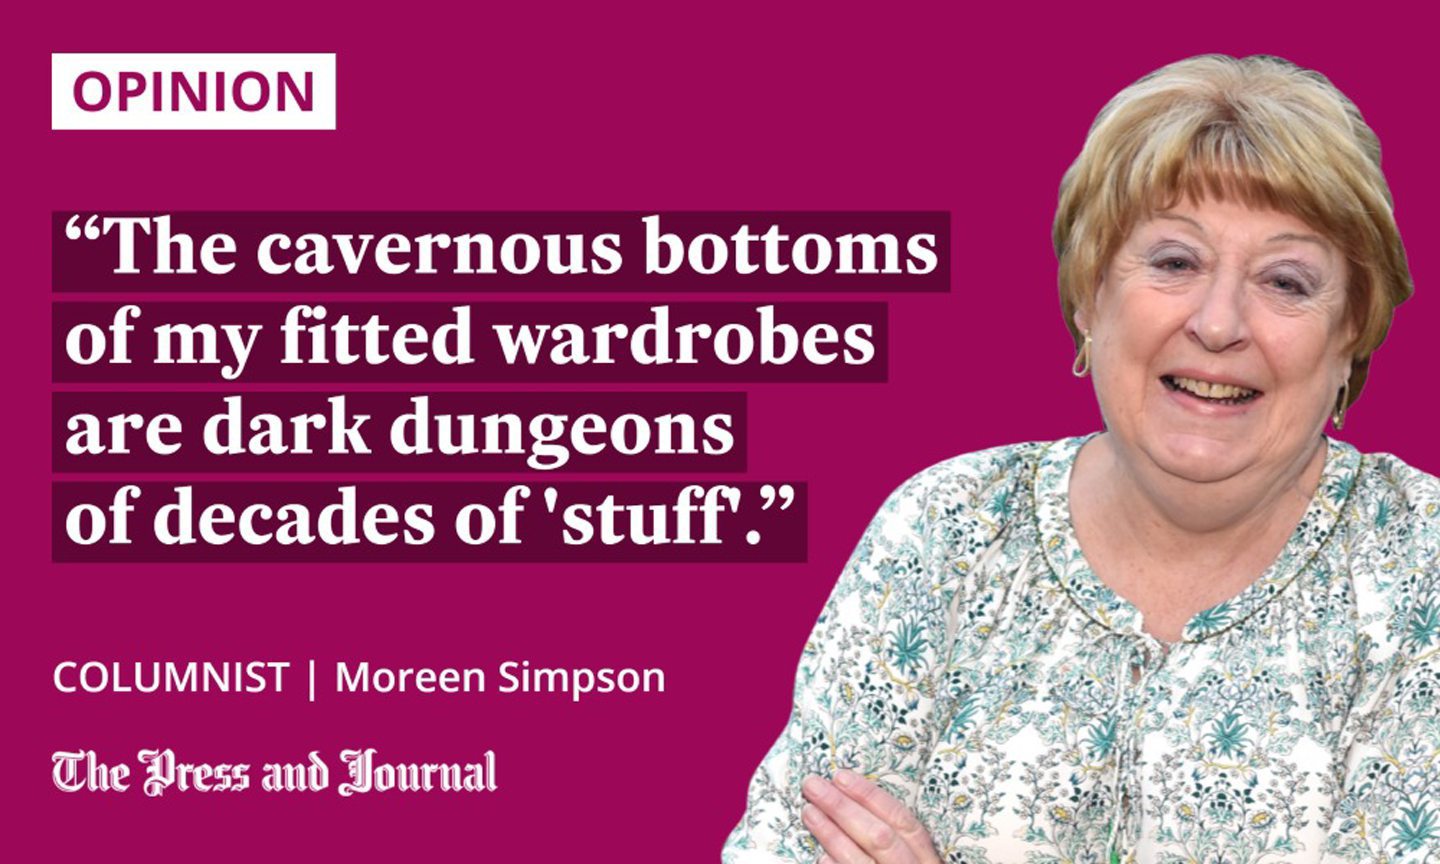 Columnist, Moreen Simpson: "The cavernous bottoms of my fitted wardrobes are dark dungeons of decades of 'stuff'"